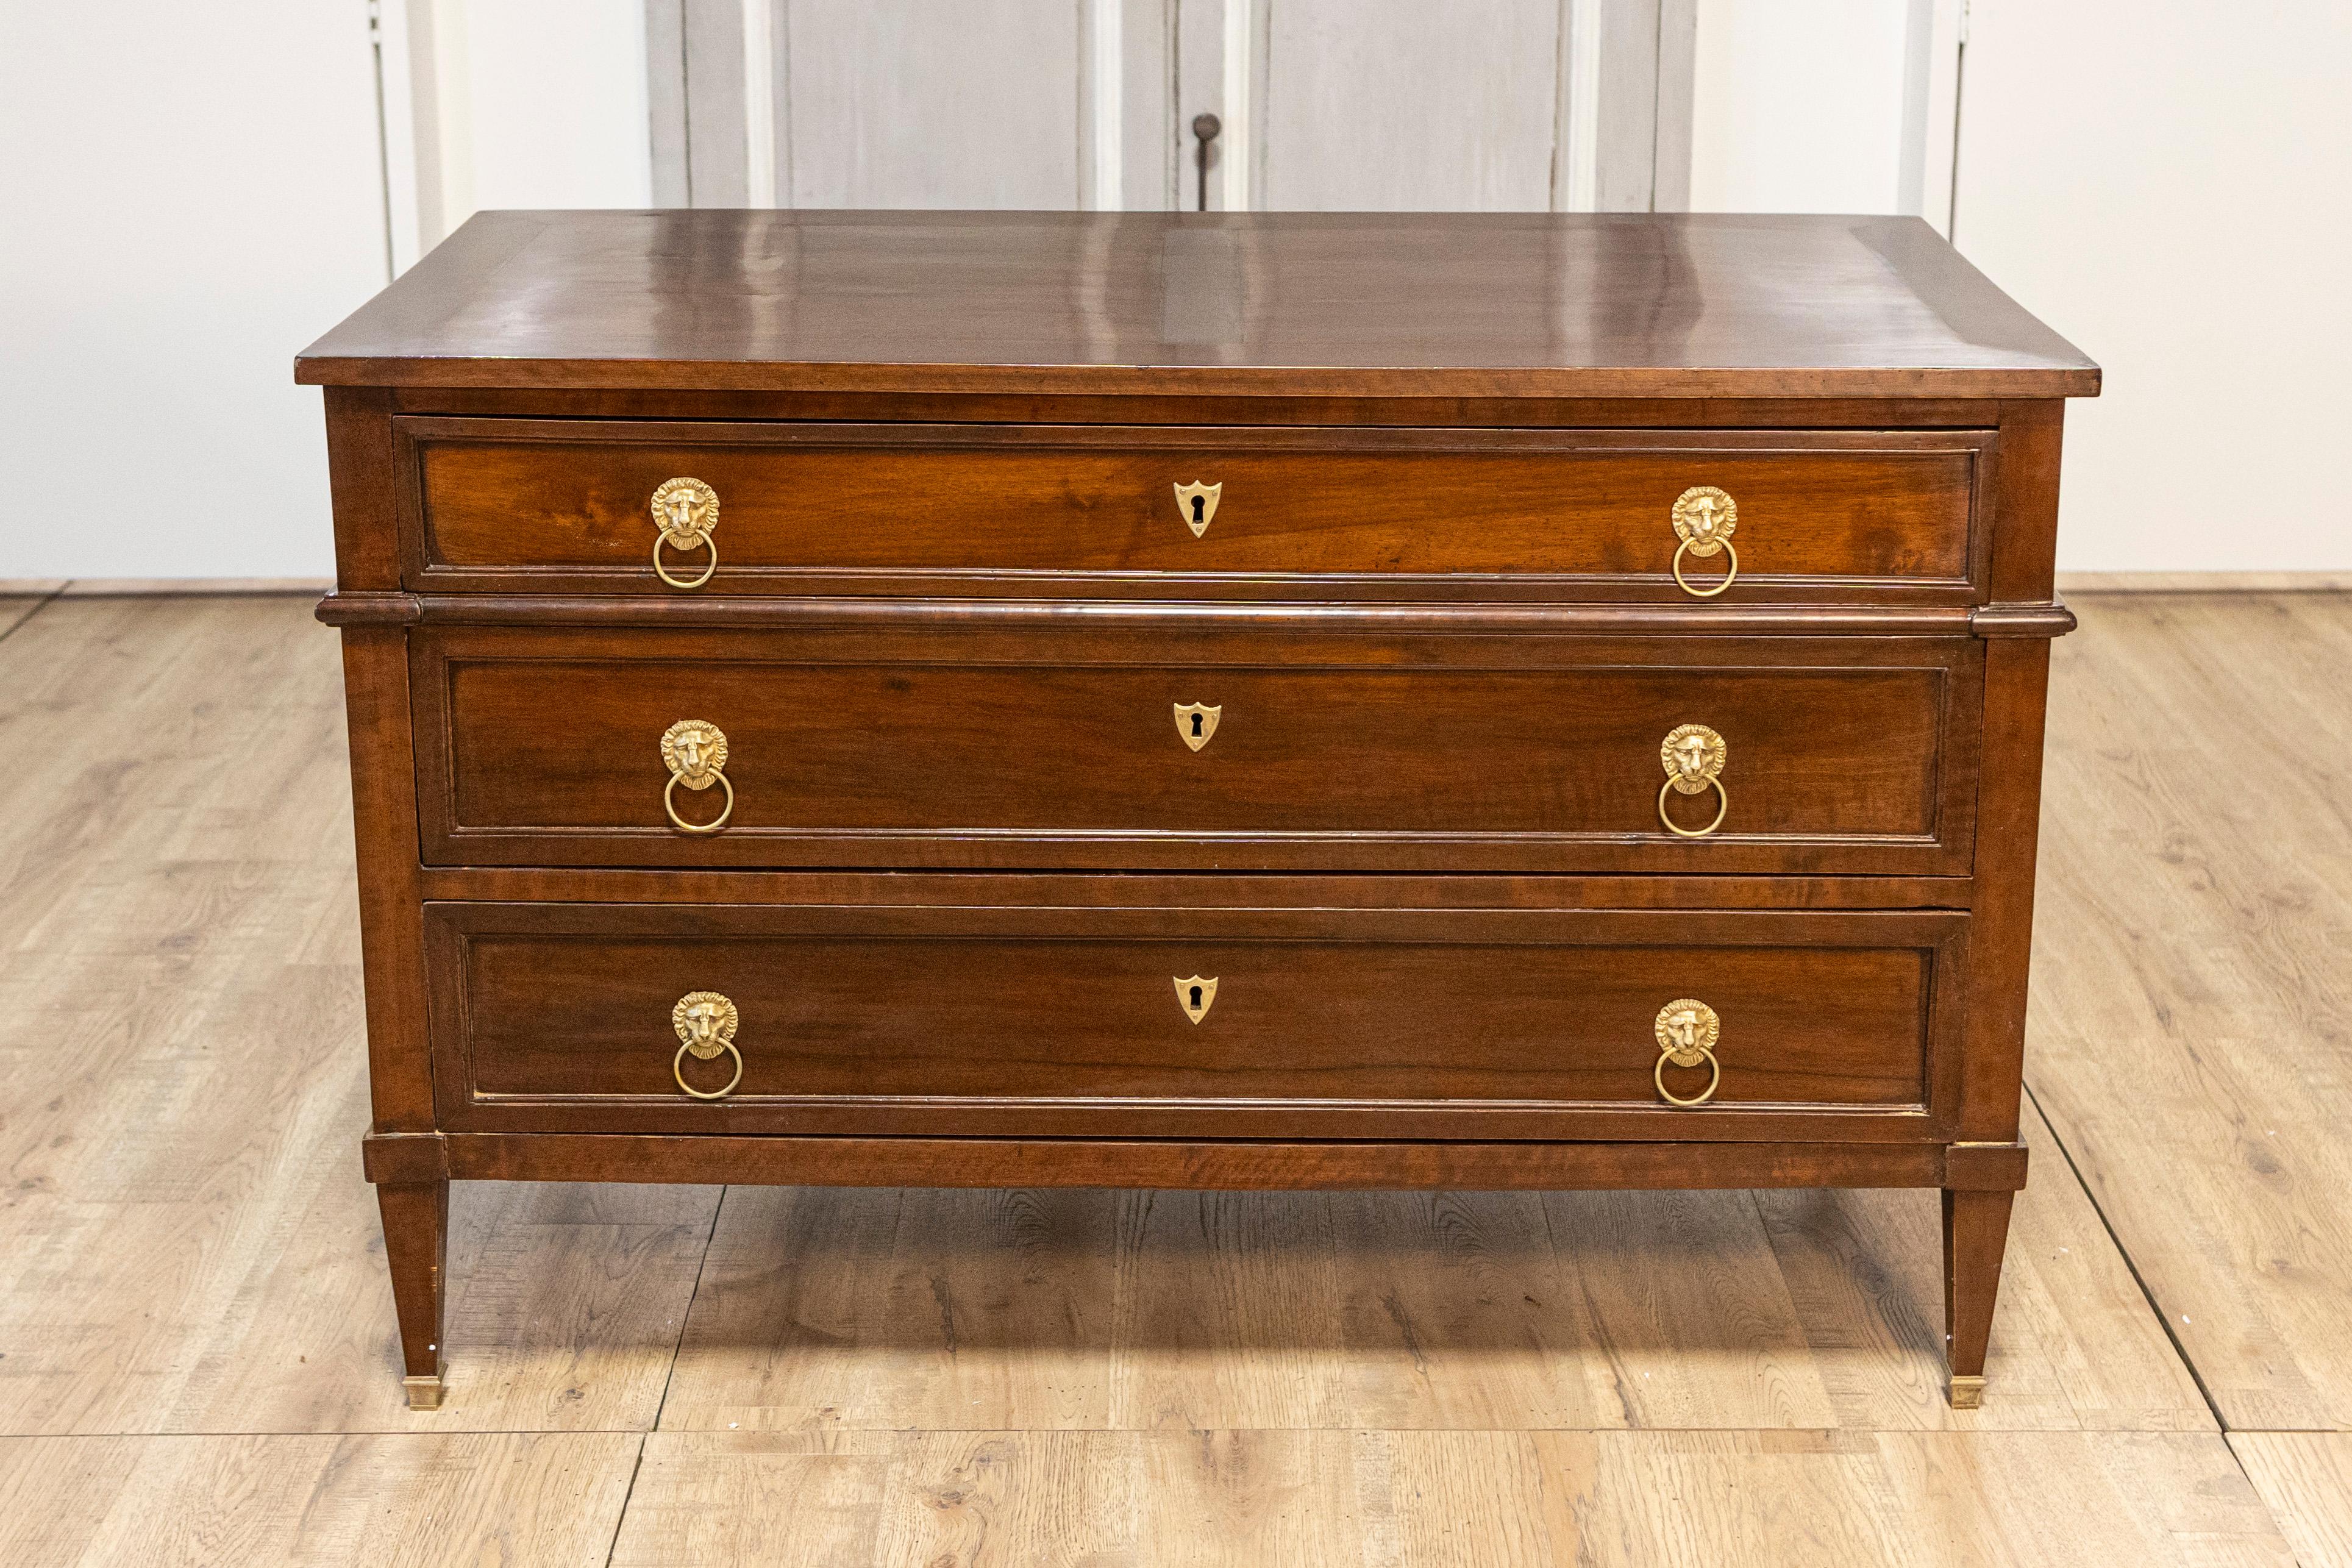 A French Louis XVI style walnut commode from circa 1890 with three drawers and brass lion head hardware. This splendid French Louis XVI style walnut commode, dating back to circa 1890, merges classic design with functional elegance. It boasts three